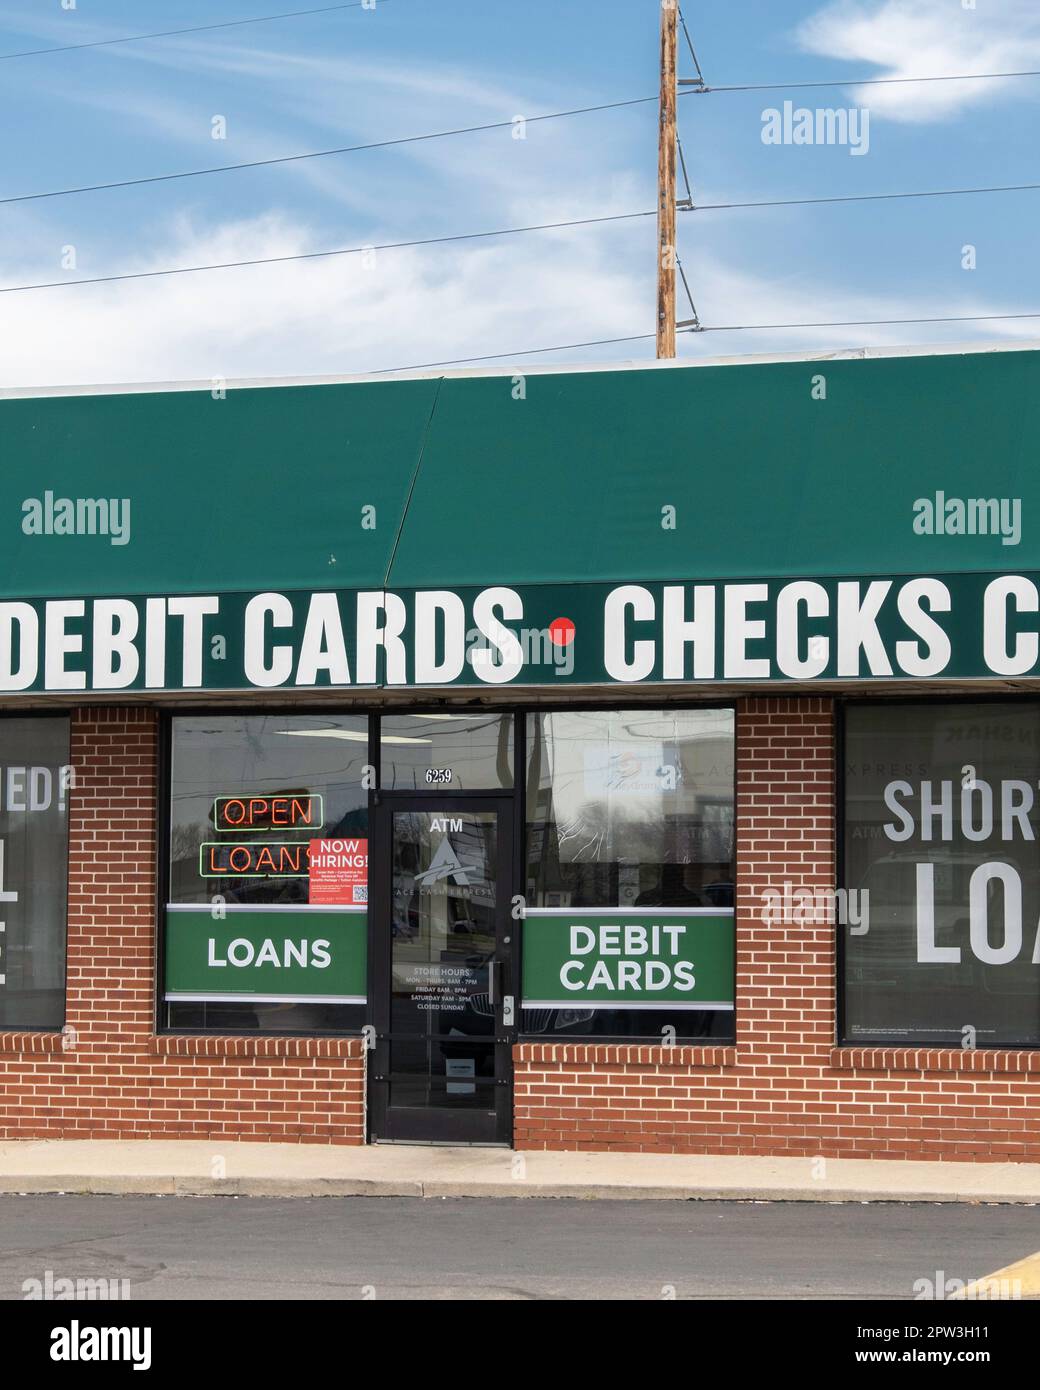 Storefront and entrance of a Loans, Debit Cards & Checks Cashed business, or fast cash, in Wichita, Kansas, USA. Stock Photo